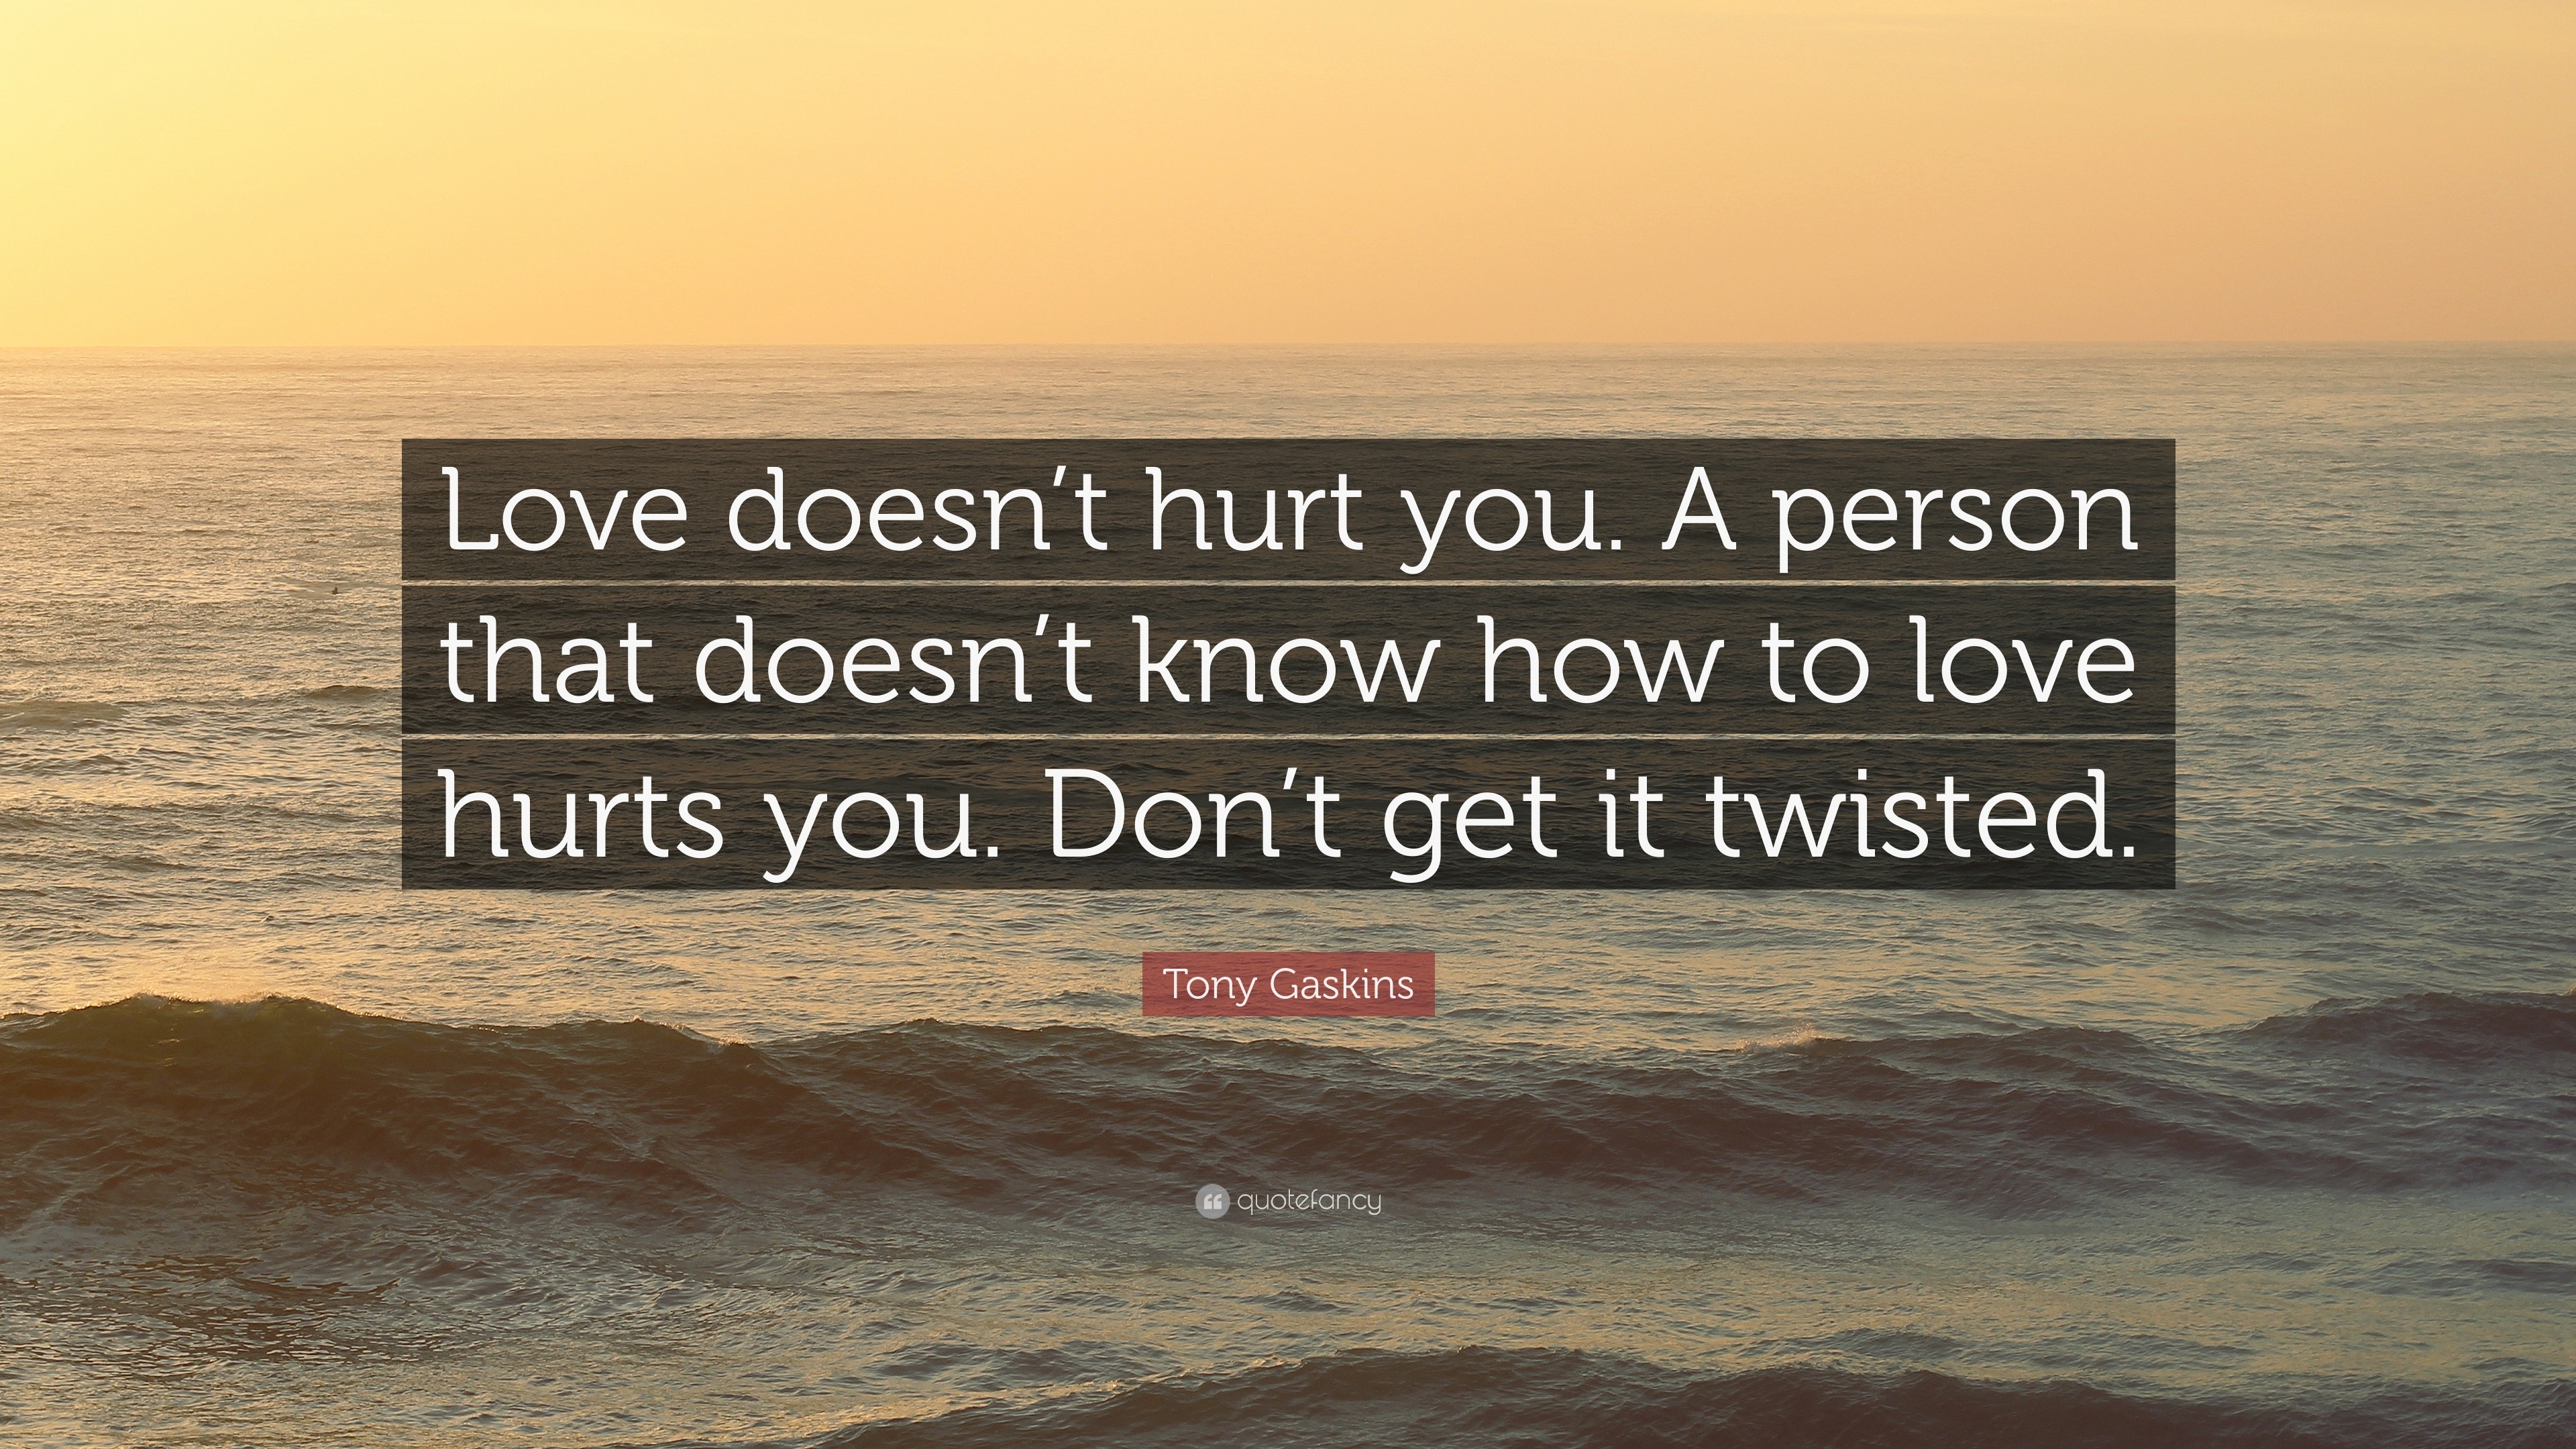 Tony Gaskins Quote “Love doesn t hurt you A person that doesn